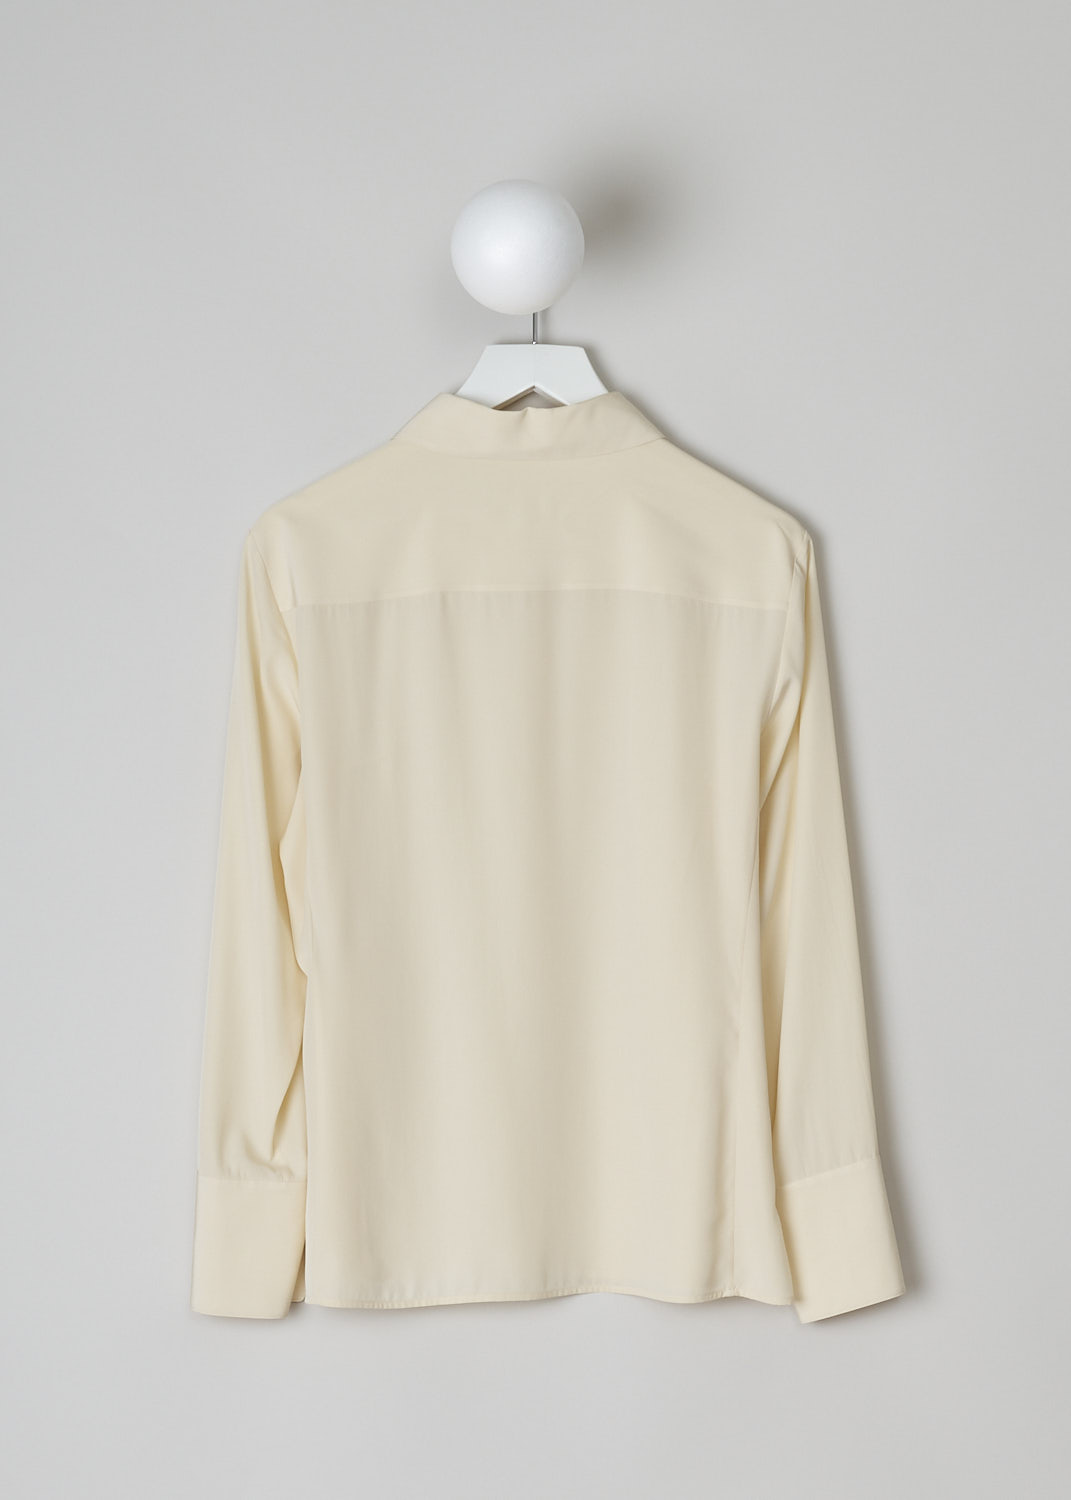 CHLOÉ, BEIGE BLOUSE WITH MULTICOLORED BEAD BUTTONS, CHC22SHT2900524T_SEED_PEARL_BEIGE, Beige, Back, This light beige blouse features a pointed collar and has a front button closure with resin-based bead buttons in various colors. Those same bead buttons can be found on the cuffs. The blouse has a straight hem with a centre slit in the front. 
